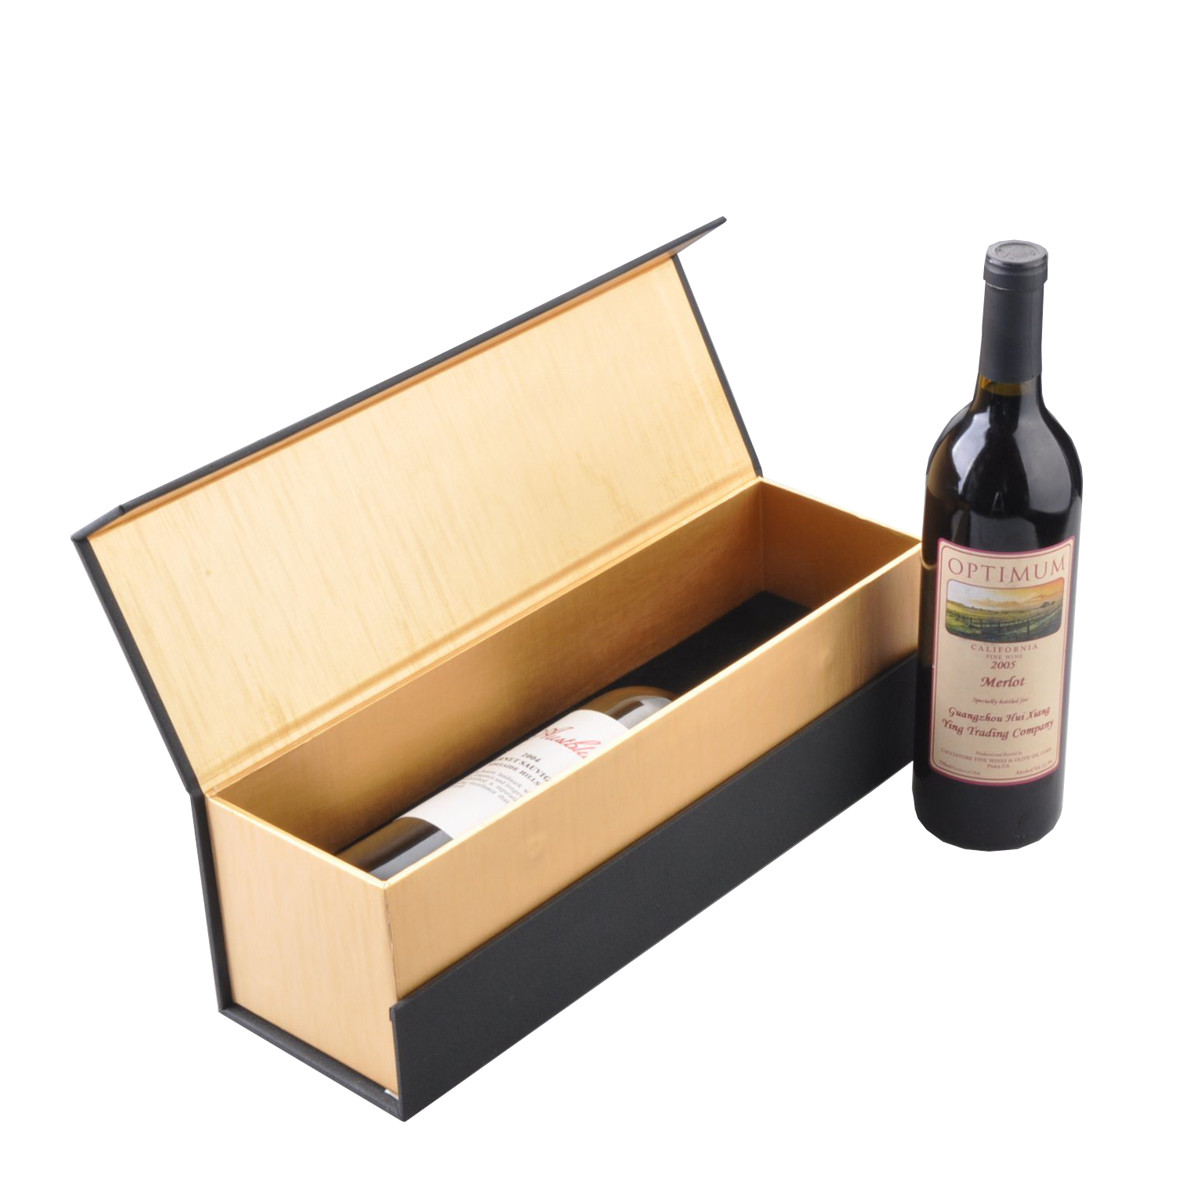  Spot Goods Luxury Wine Packing Boxes Fancy Paper Magnetic Closer Gold Hot Stamping Manufactures